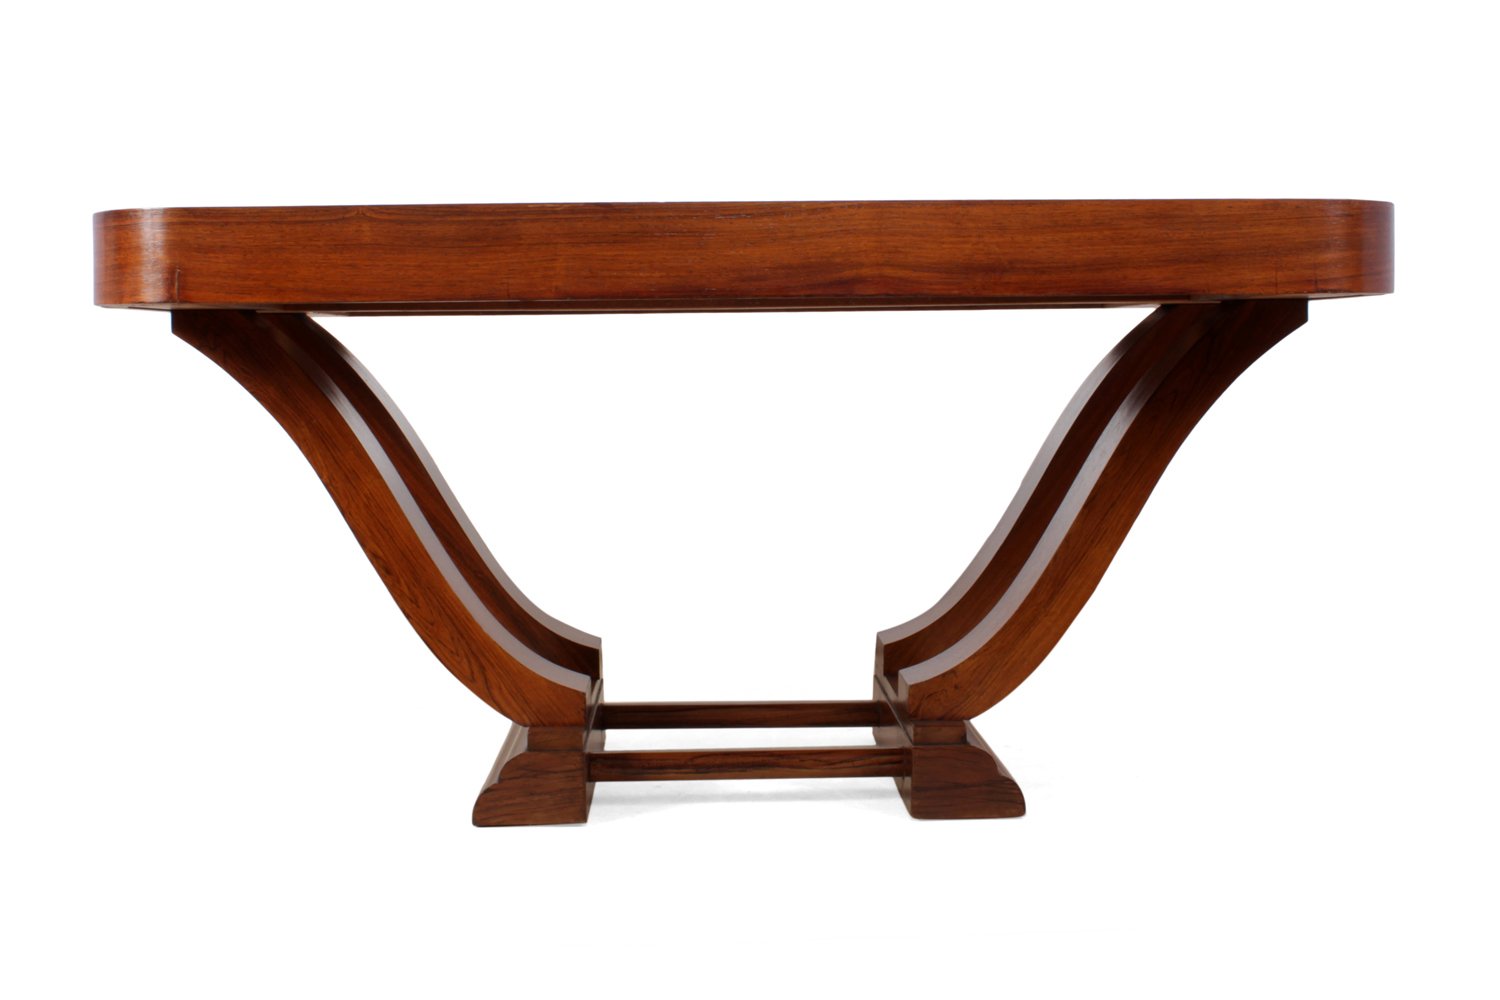 French Art Deco Dining Table In Rosewood 1920s For Sale At Pamono